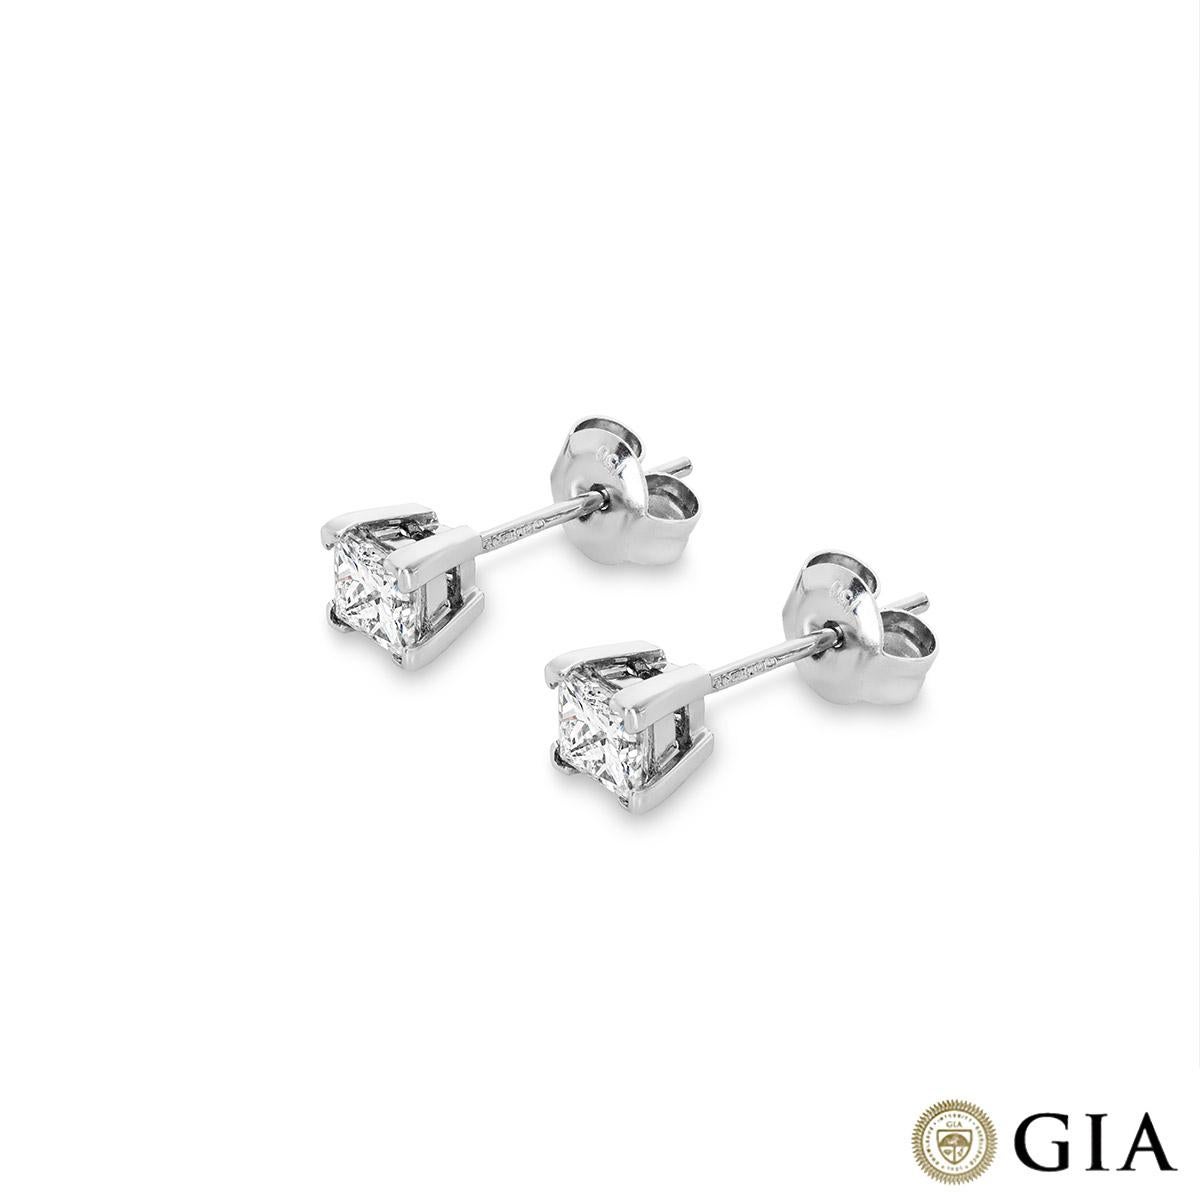 A sparkly pair of 18k white gold diamond earrings. The earrings are set to the centre with a princess cut diamond in a four prong mount. The first diamond weighs 0.50ct, D colour and VVS2 clarity and the second diamond weighs 0.51ct, D colour and